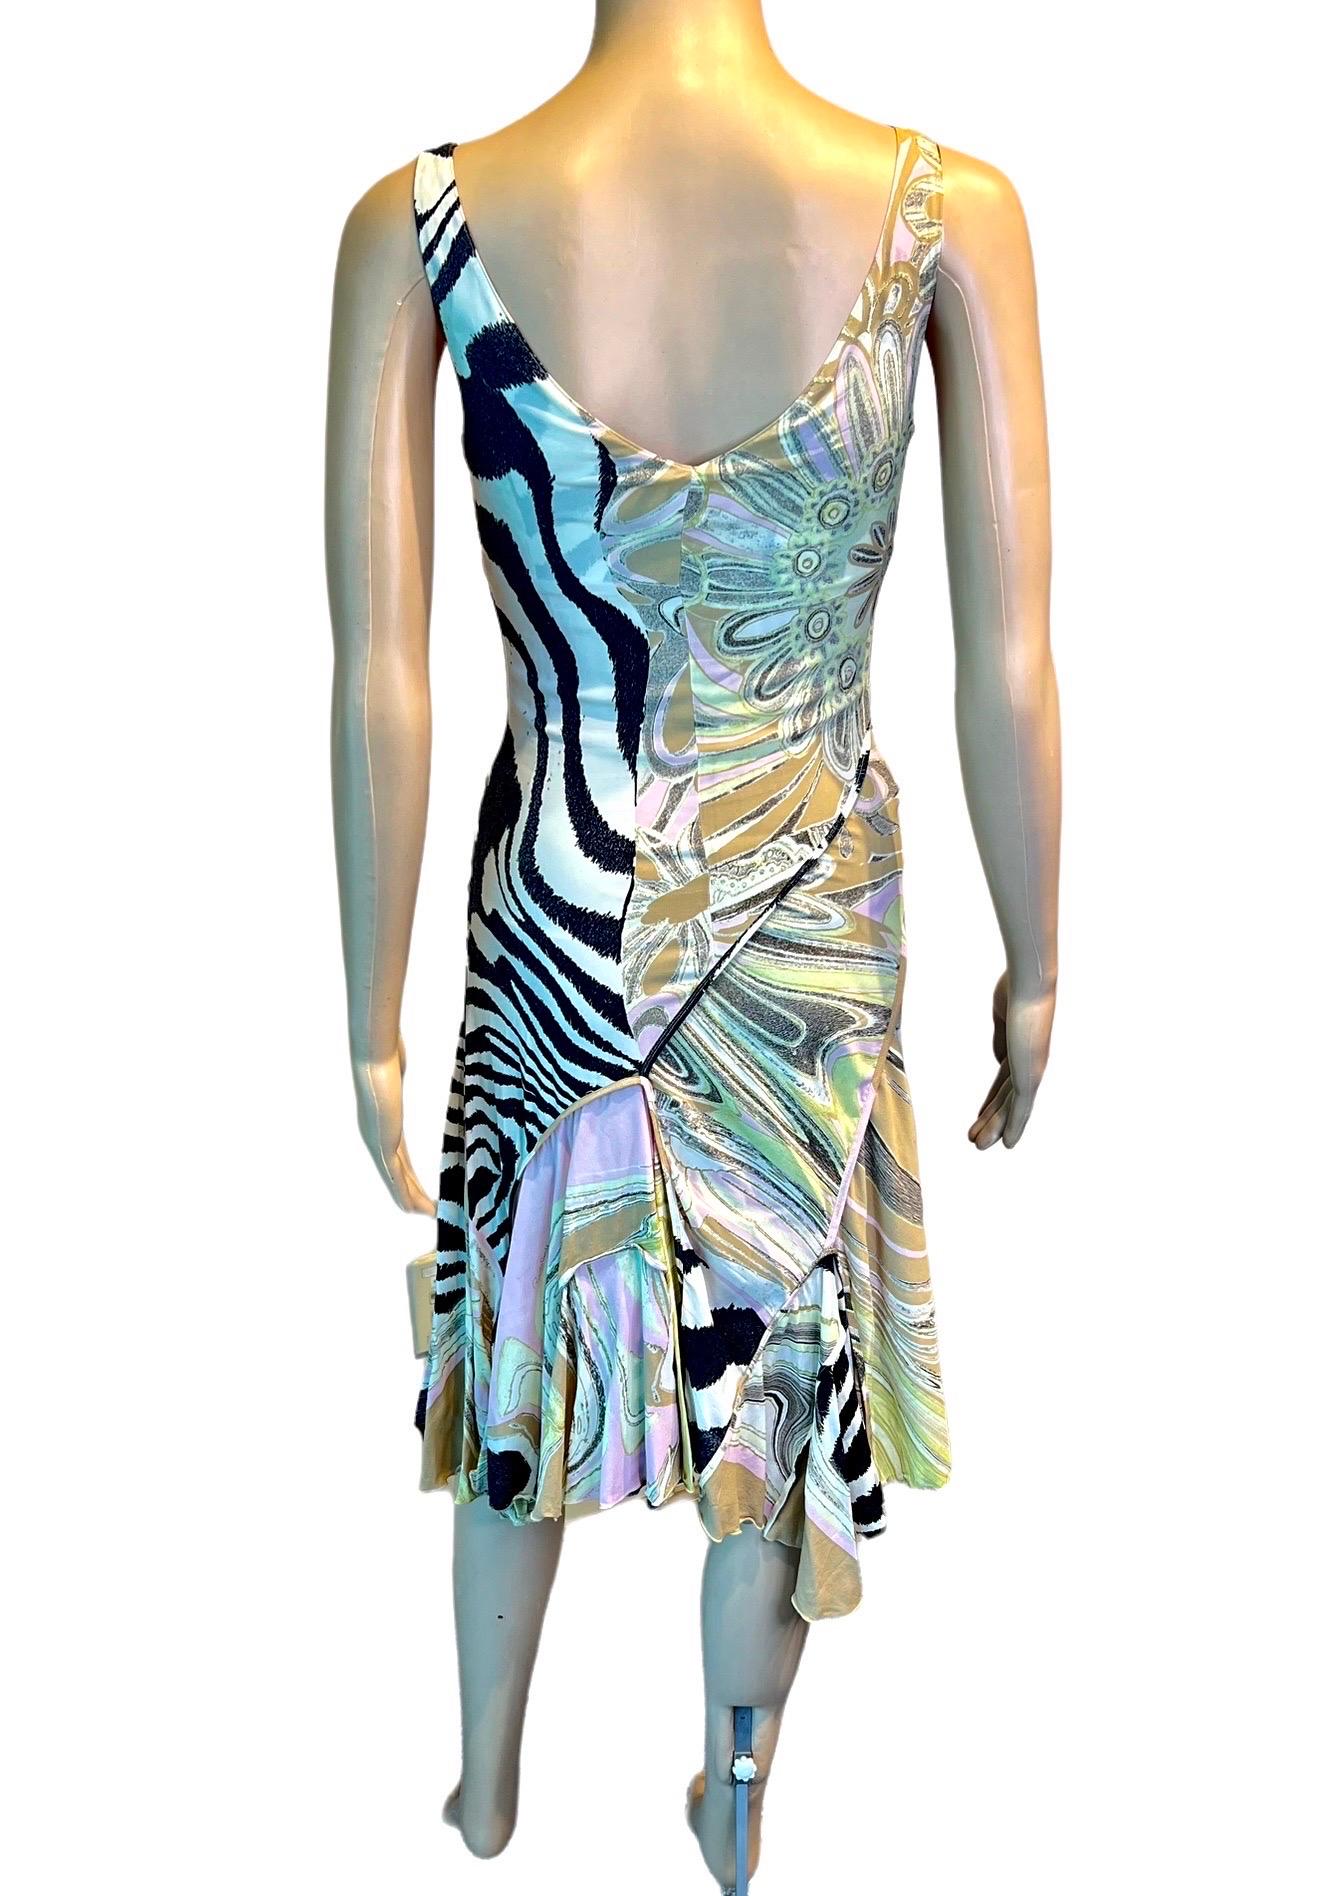 Women's Roberto Cavalli S/S 2004 Floral Abstract Print Asymmetric Dress For Sale